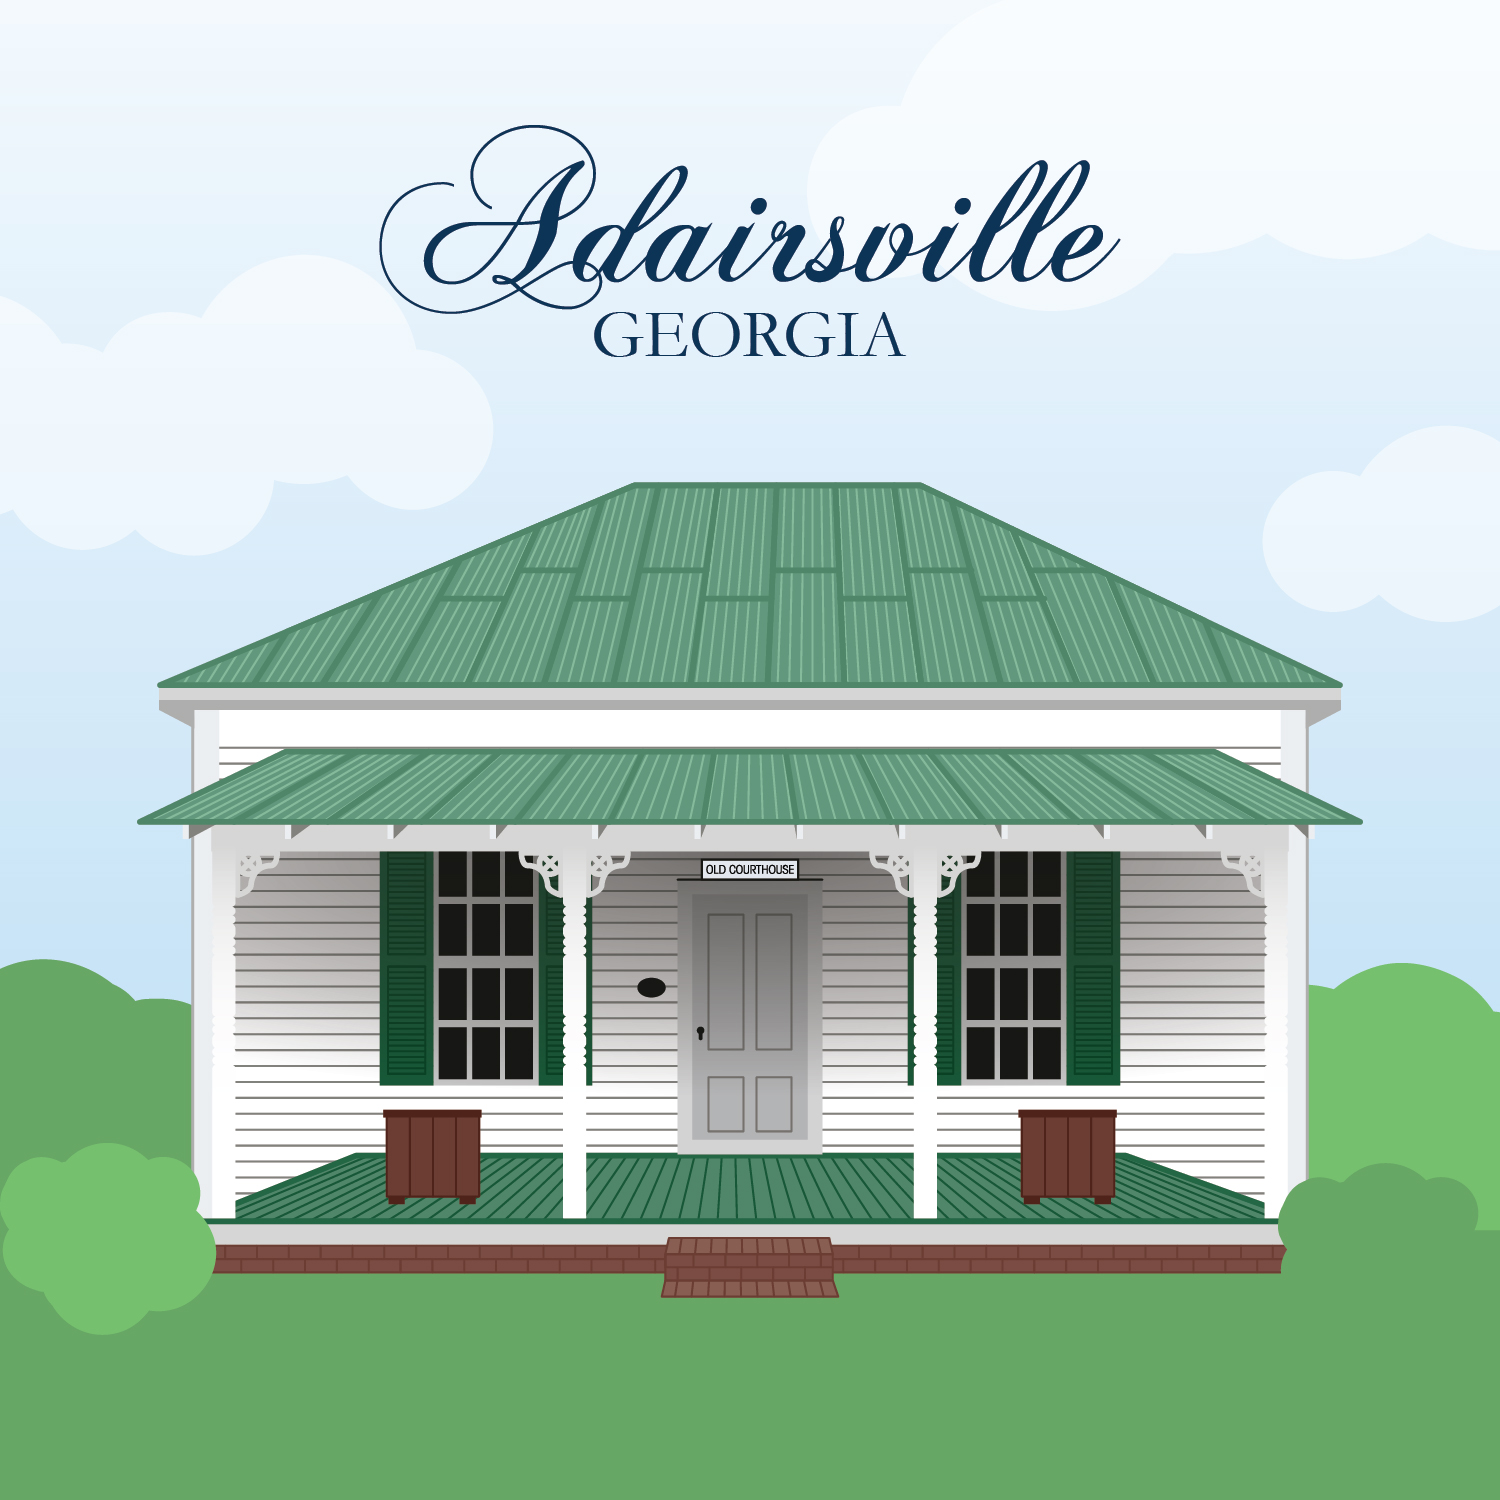 Custom Illustration of Old Courthouse in Adairsville Georgia